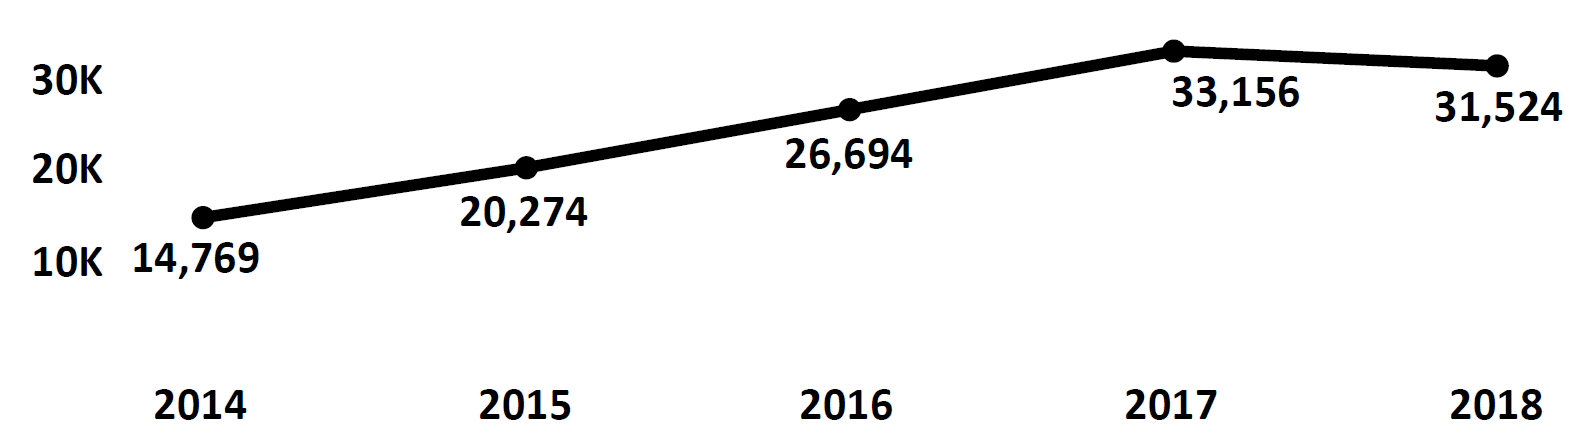 Graph of Do Not Call complaints recorded in Idaho from fiscal year 2014 to fiscal year 2018. In 2014 there were 14,769 complaints filed, which increased each year to peak at 33,156 in 2017. In 2018 there were 31,524 complaints filed, fewer than 2017.